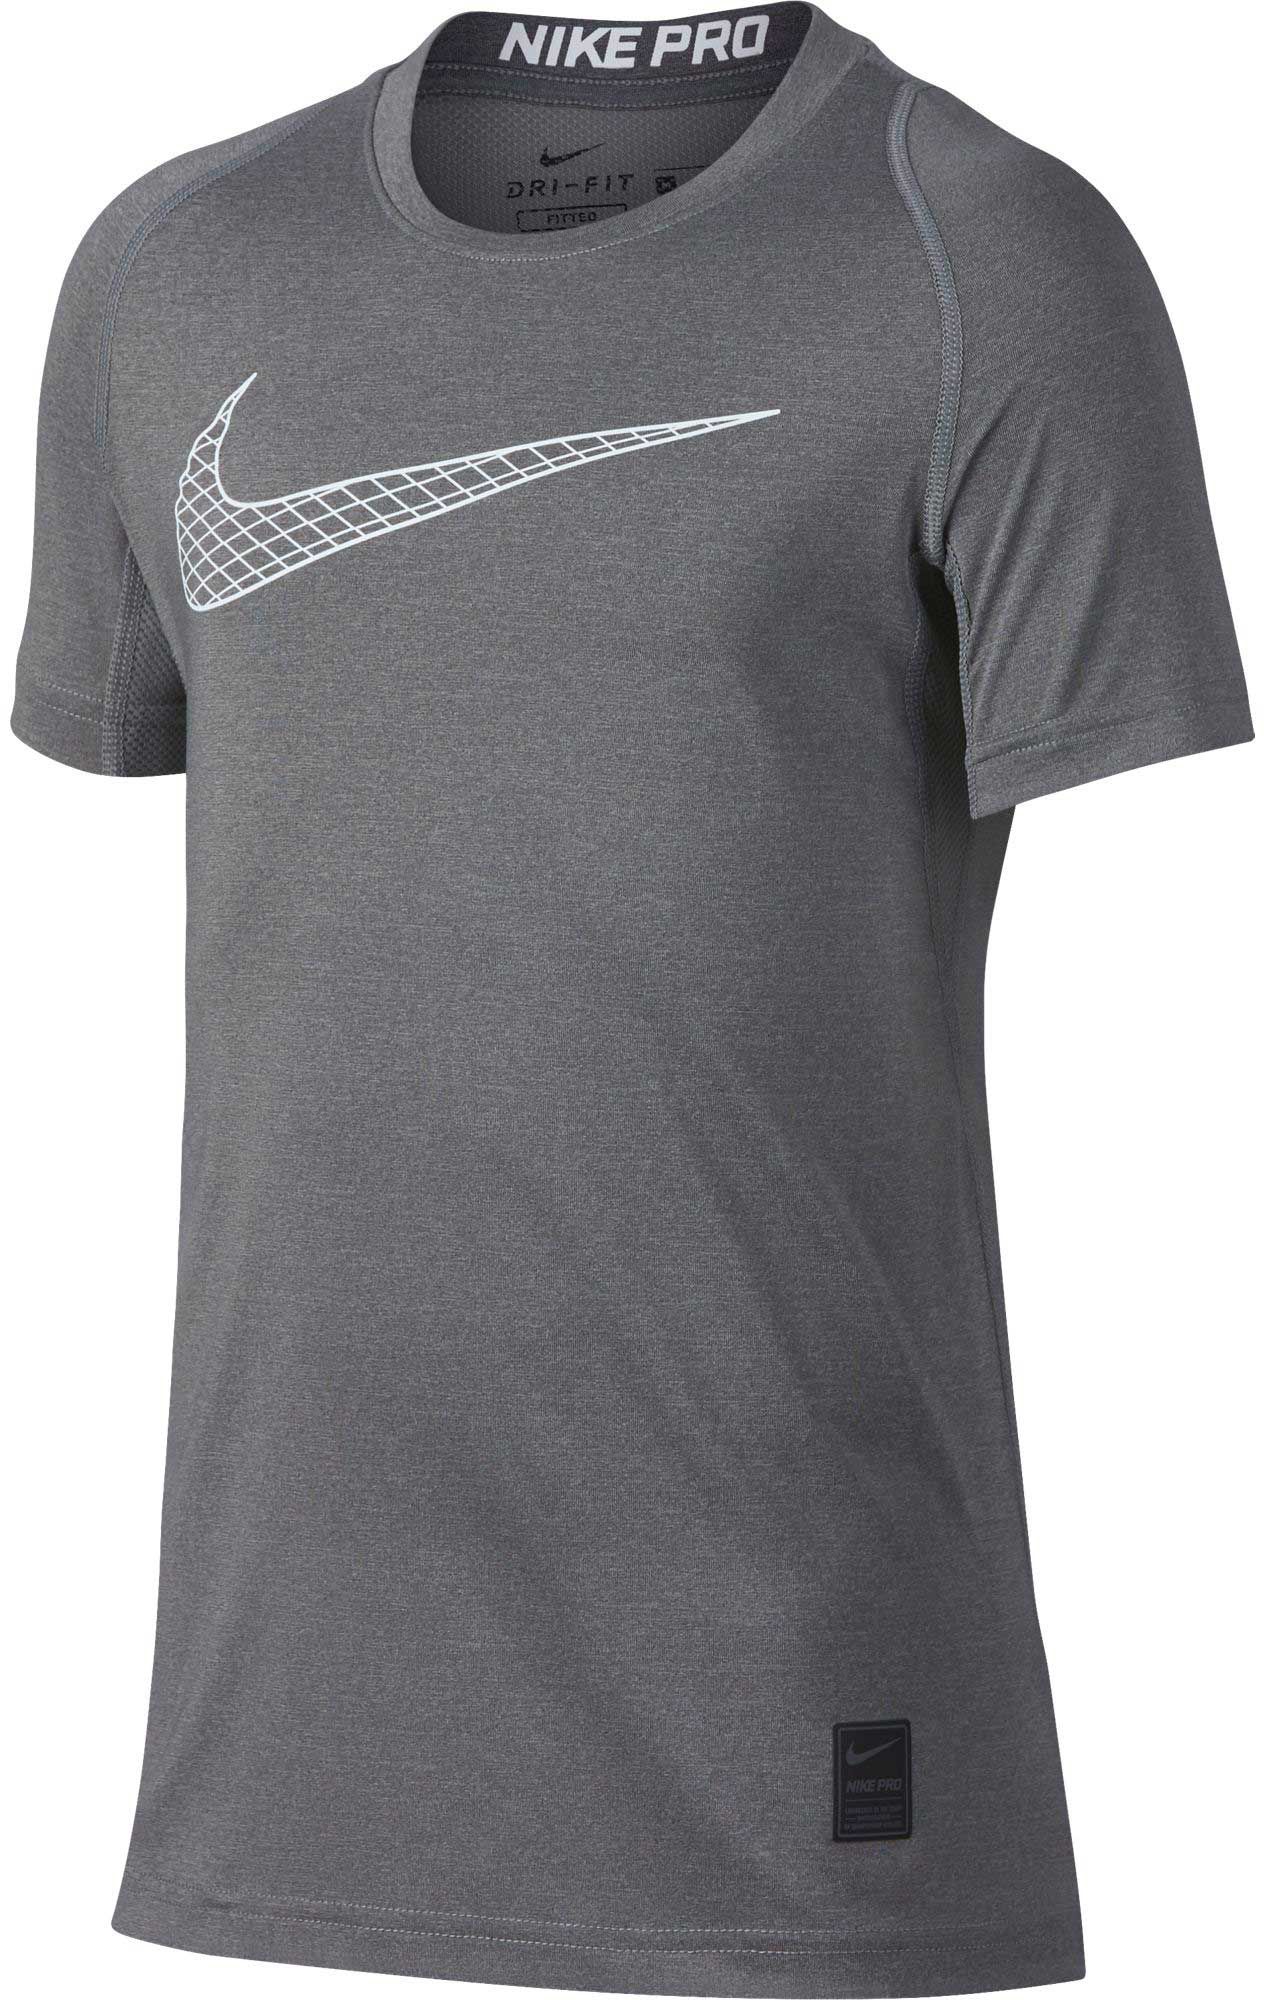 Nike Pro Boys' Fitted Graphic T-Shirt 